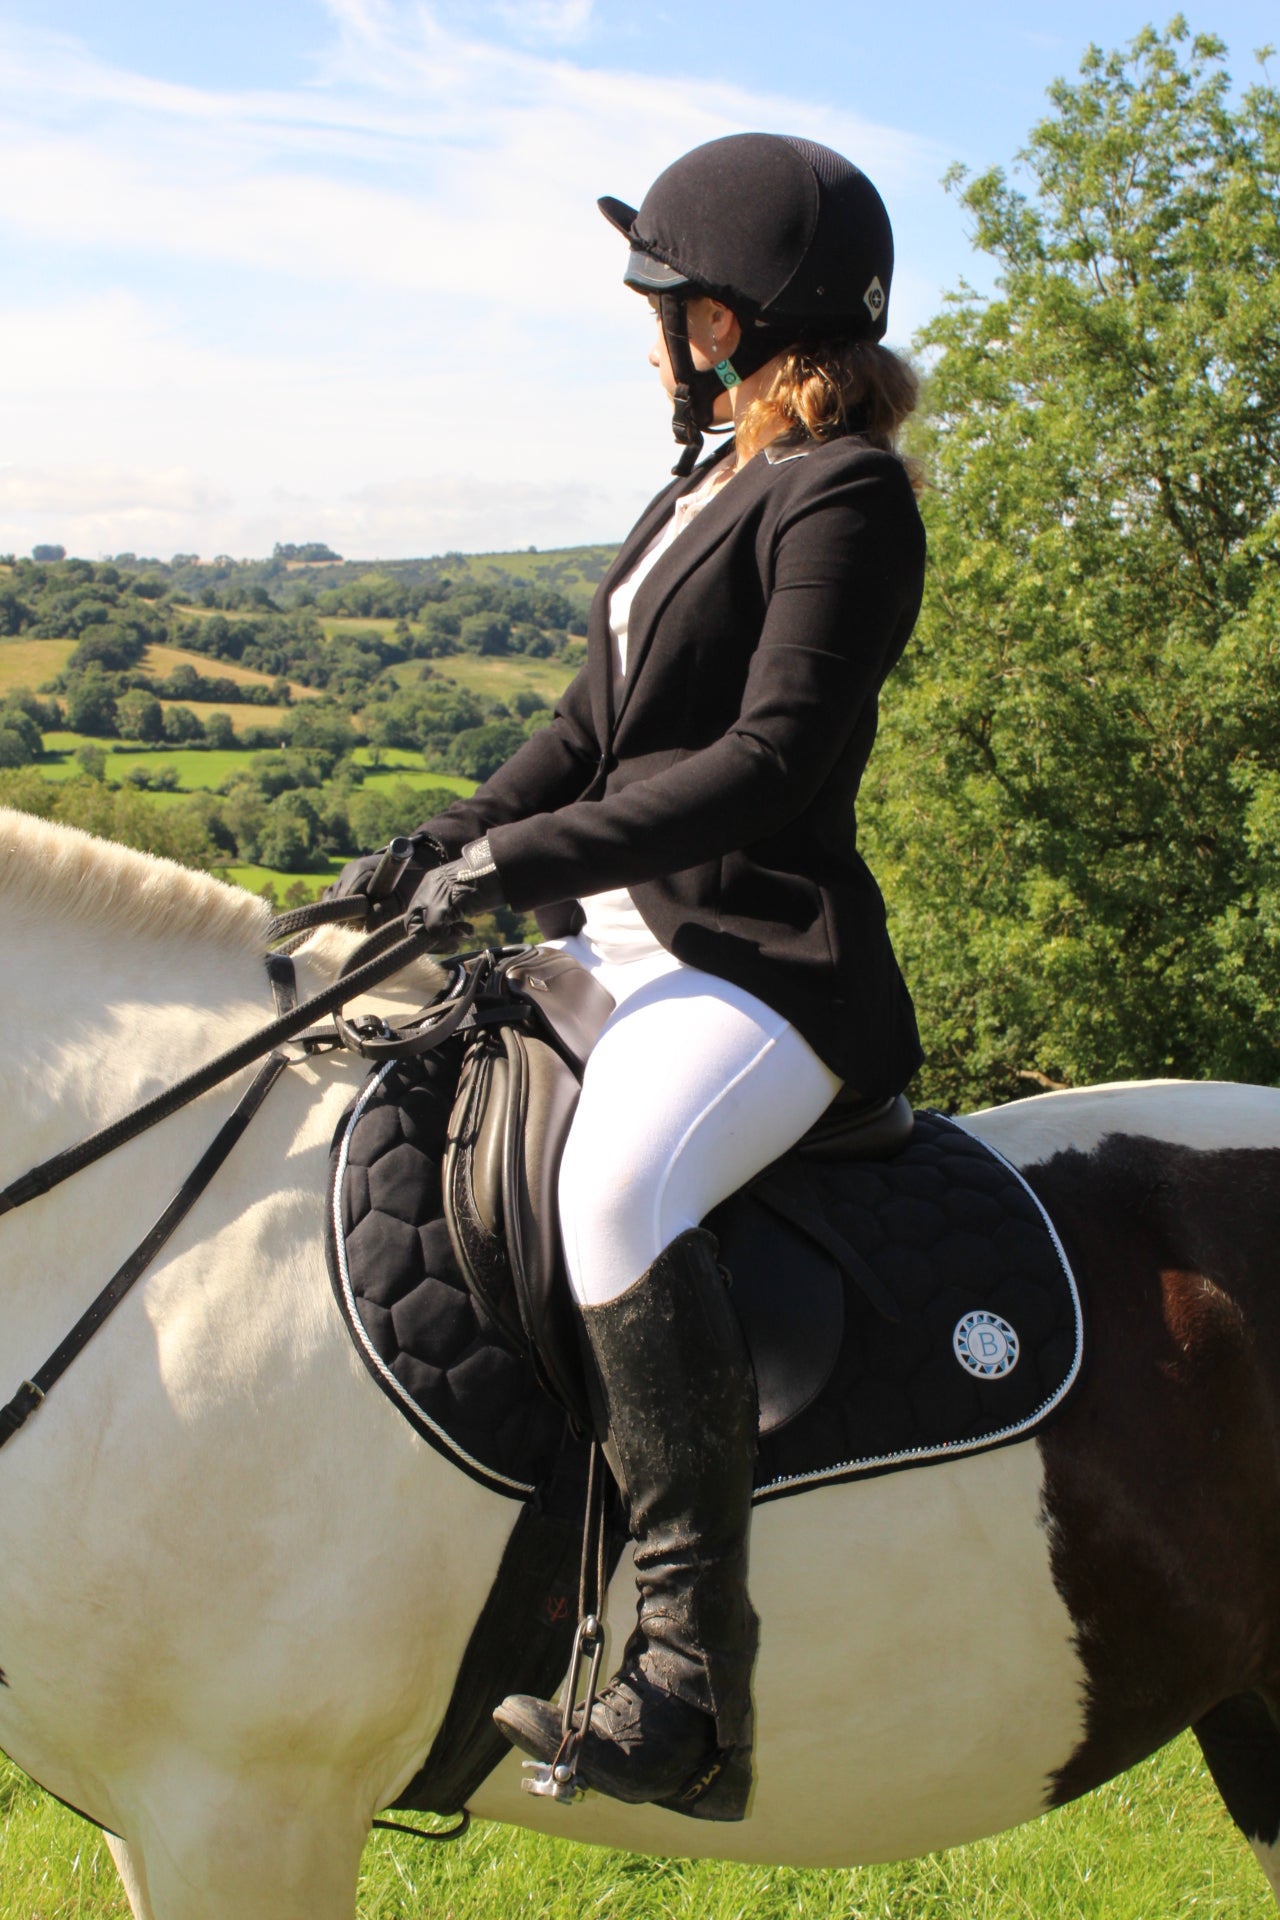 Luxury black suede competition saddle pad numnah with white piping and diamontés on it.